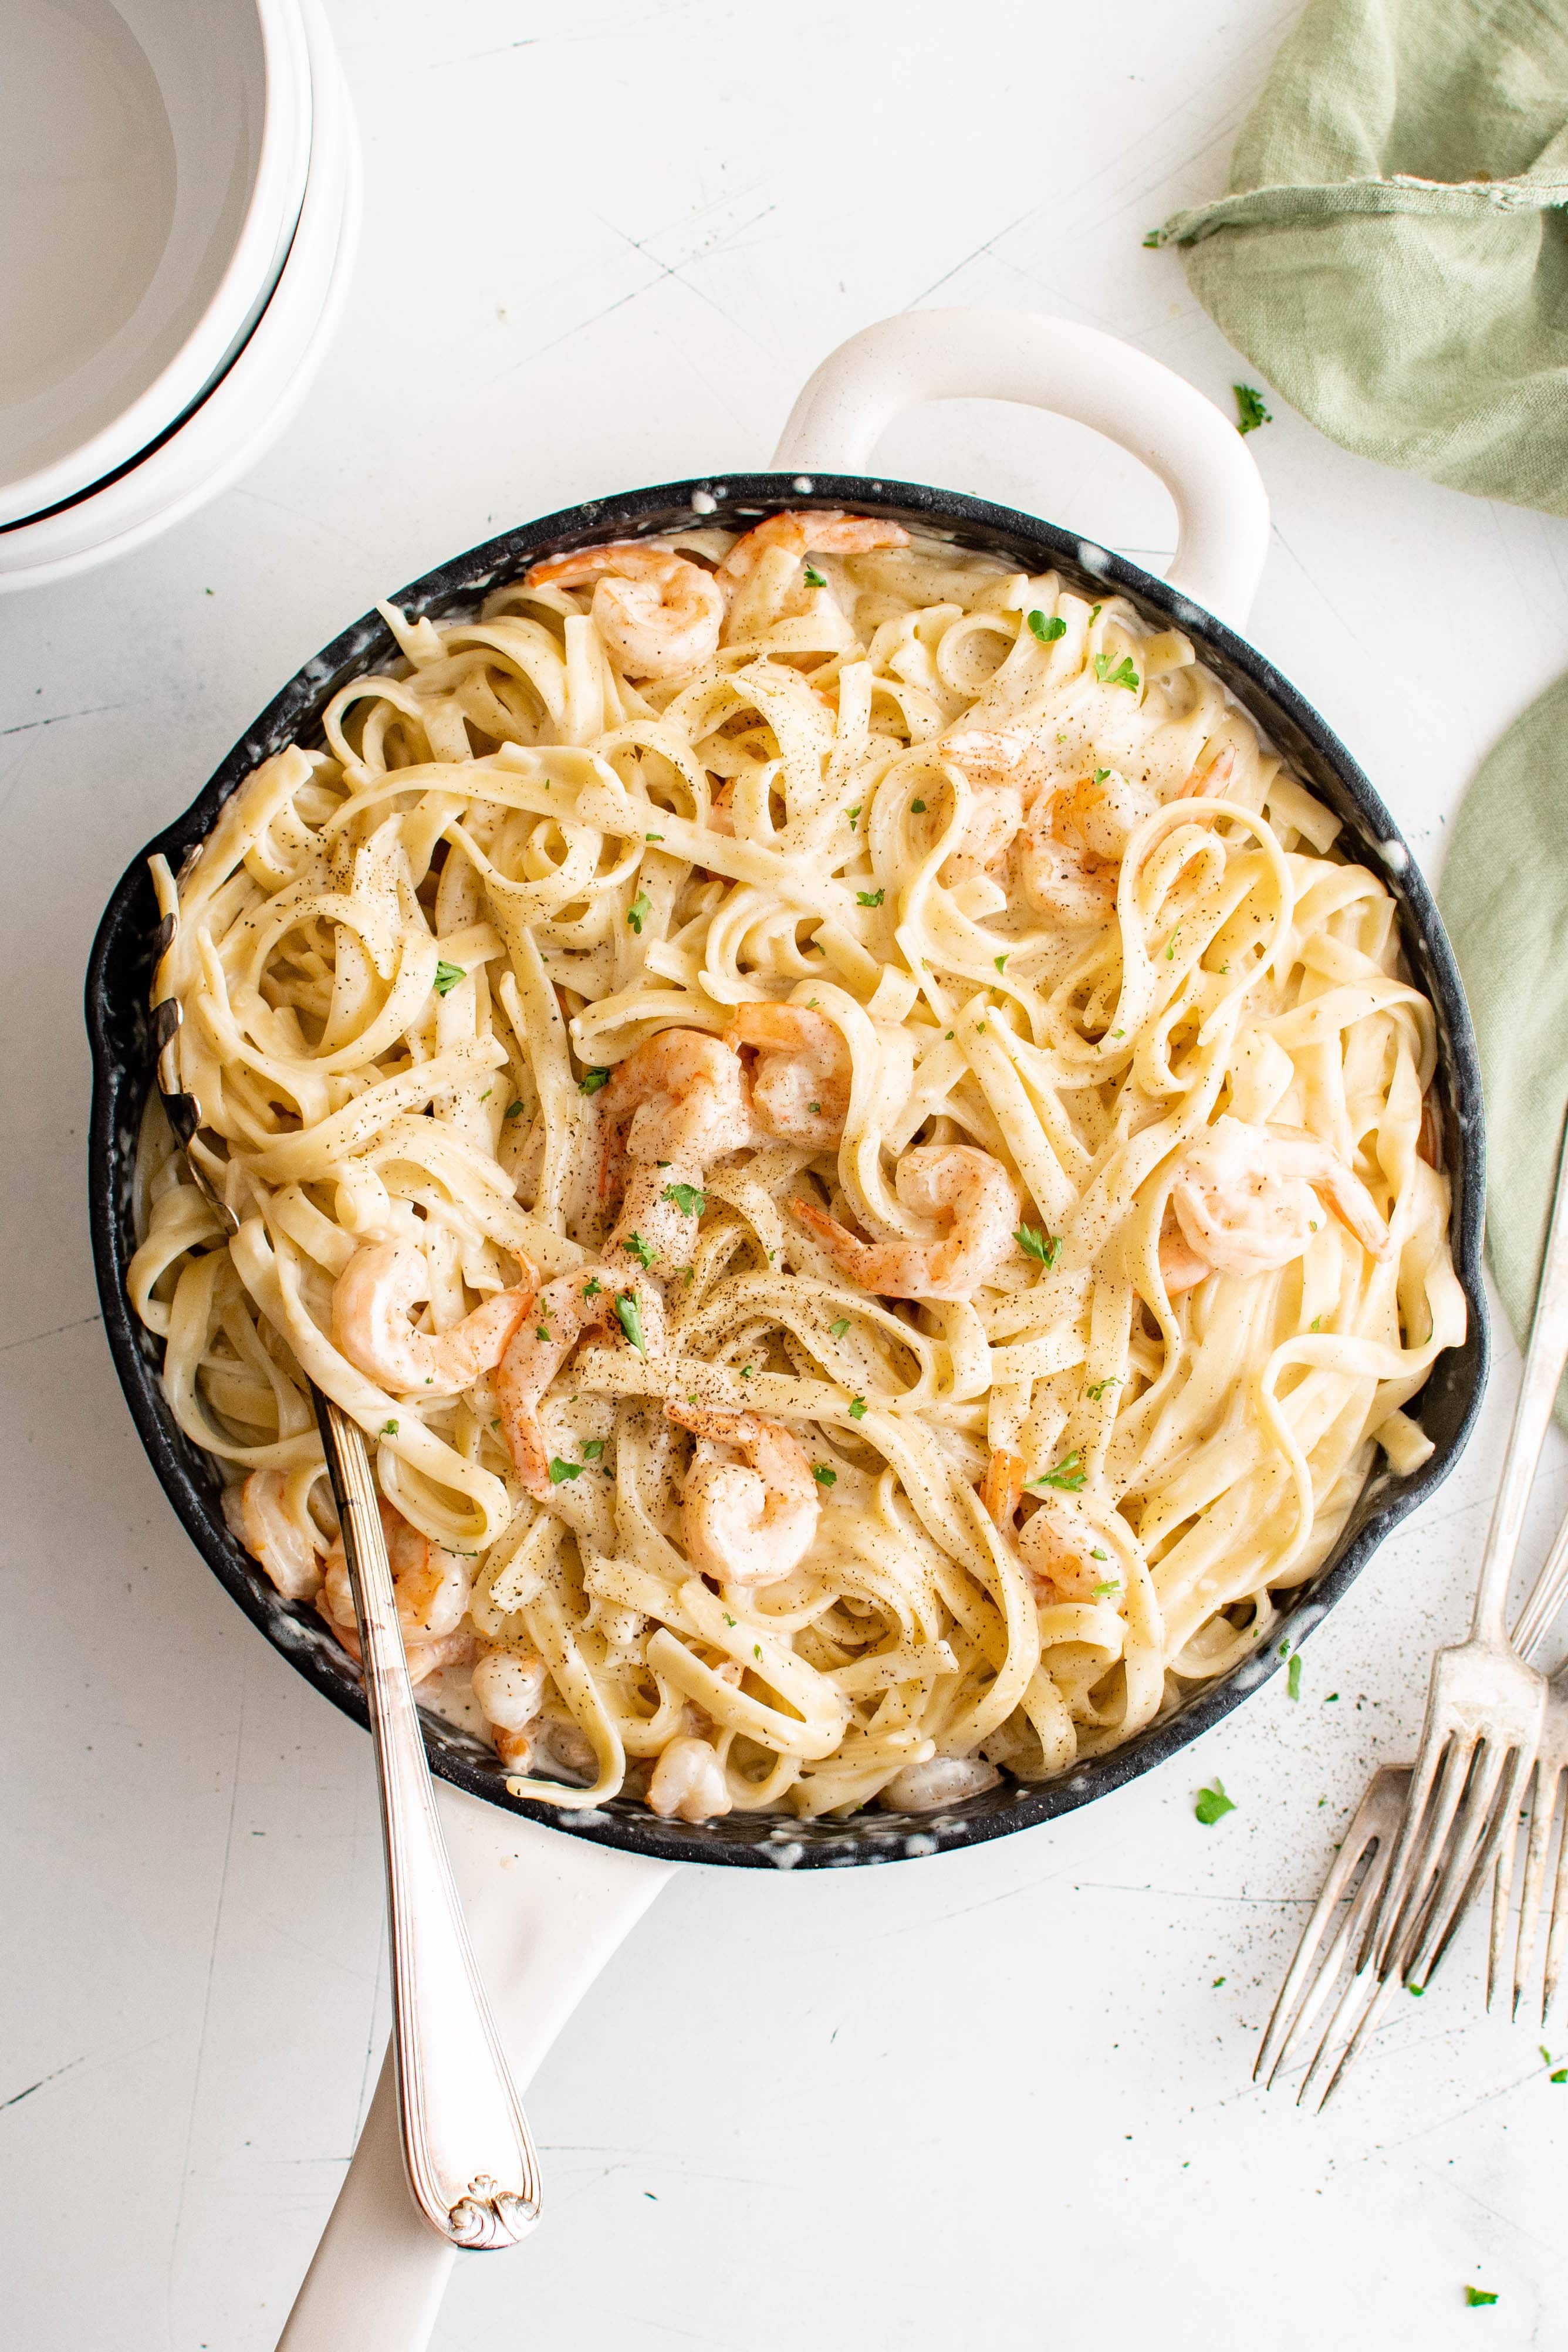 Large skillet filled with creamy shrimp alfredo with fettuccine pasta.